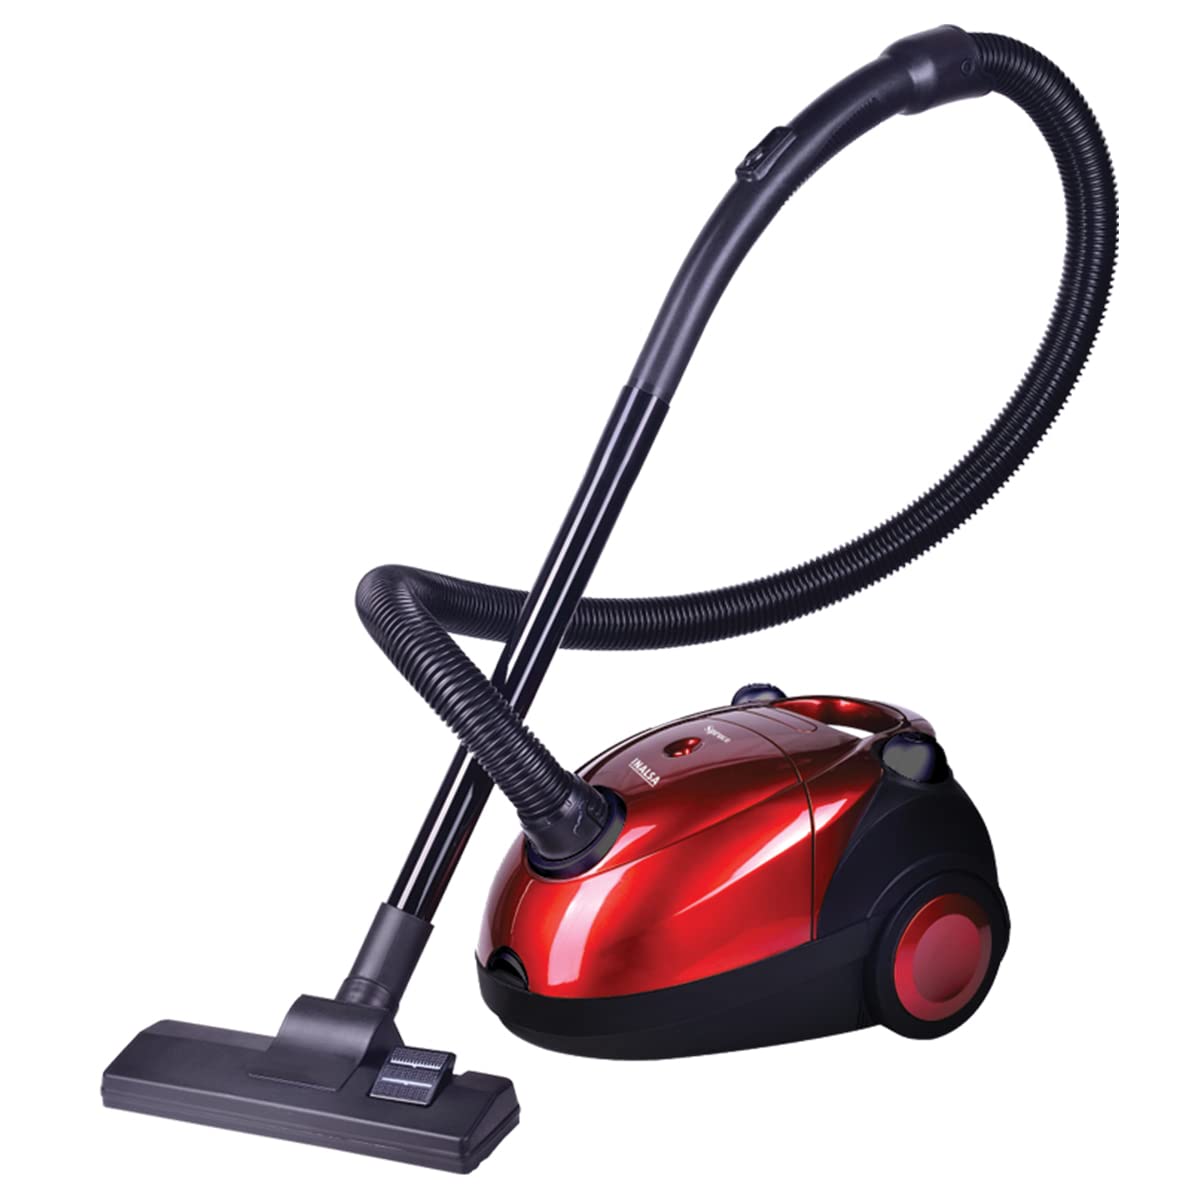 Inalsa Spruce-1200W Vacuum Cleaner for Home